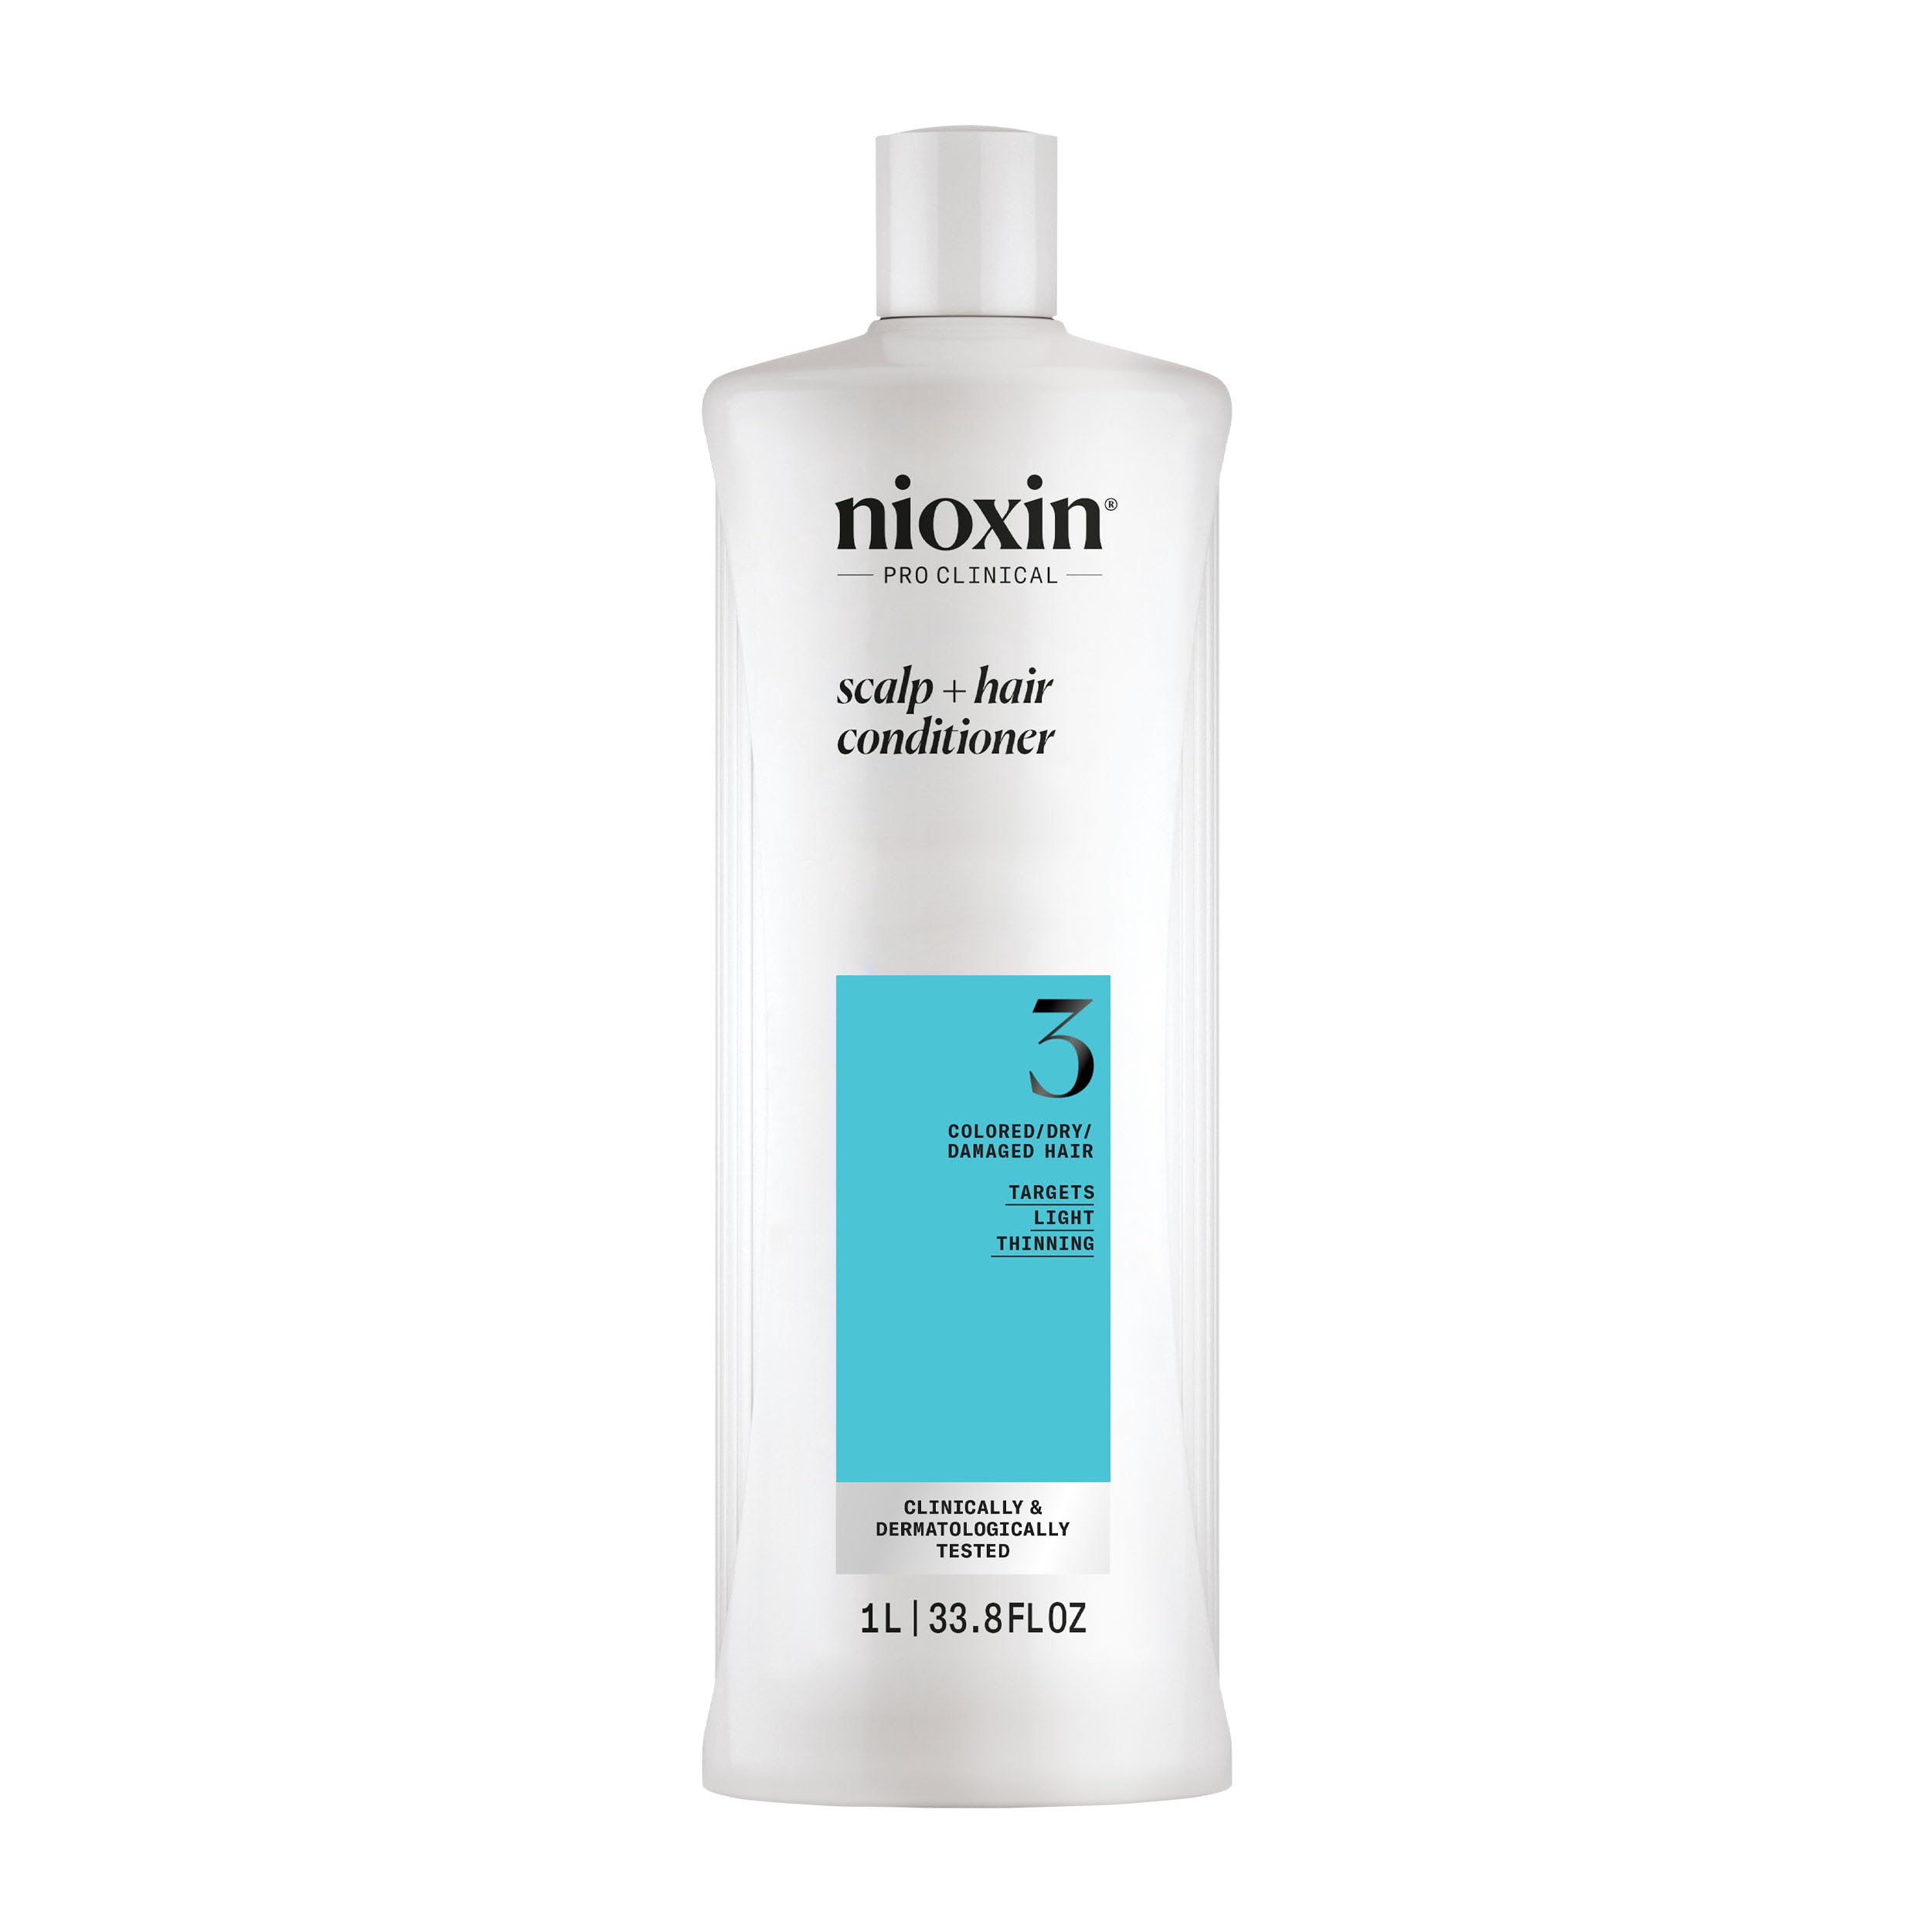 Nioxin System 3 Scalp + Hair Conditioner - Hair Thickening Conditioner for Damaged Hair with Light Thinning, 33.8oz